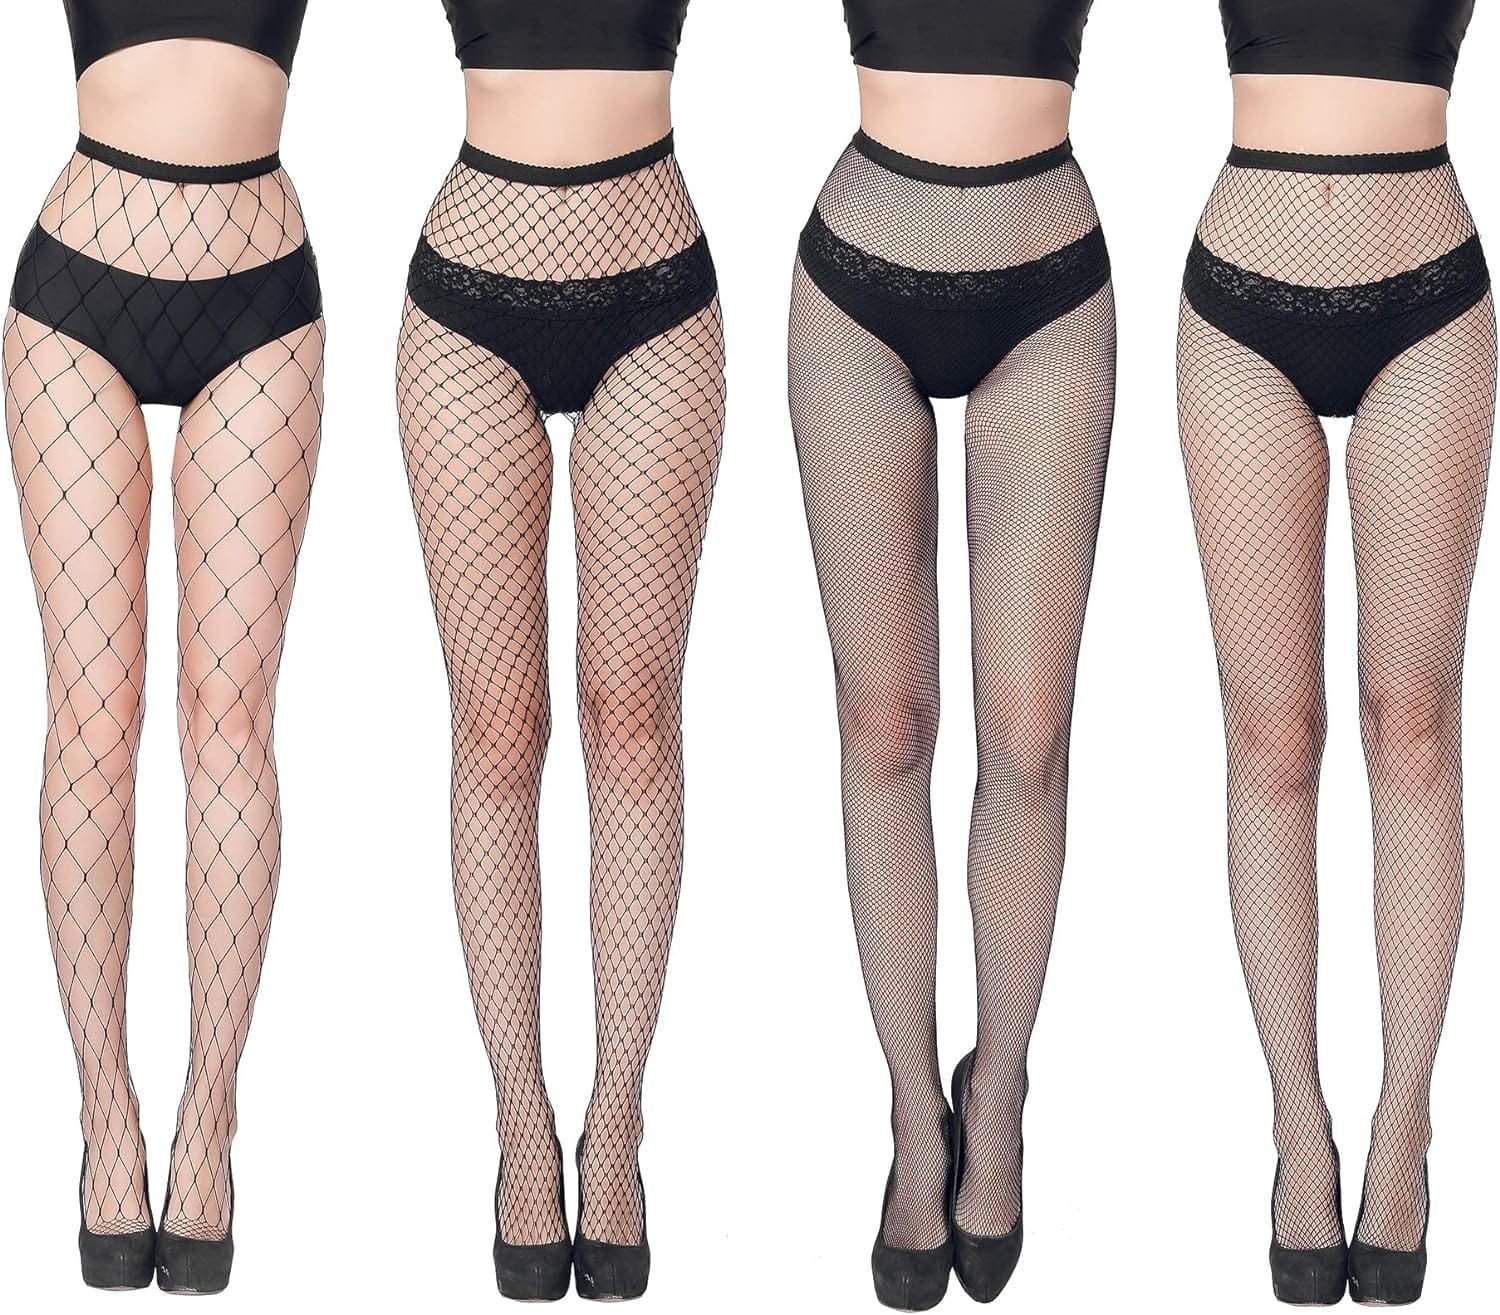 You are currently viewing GARTOL Women’s High Waisted Fishnet Tights Review